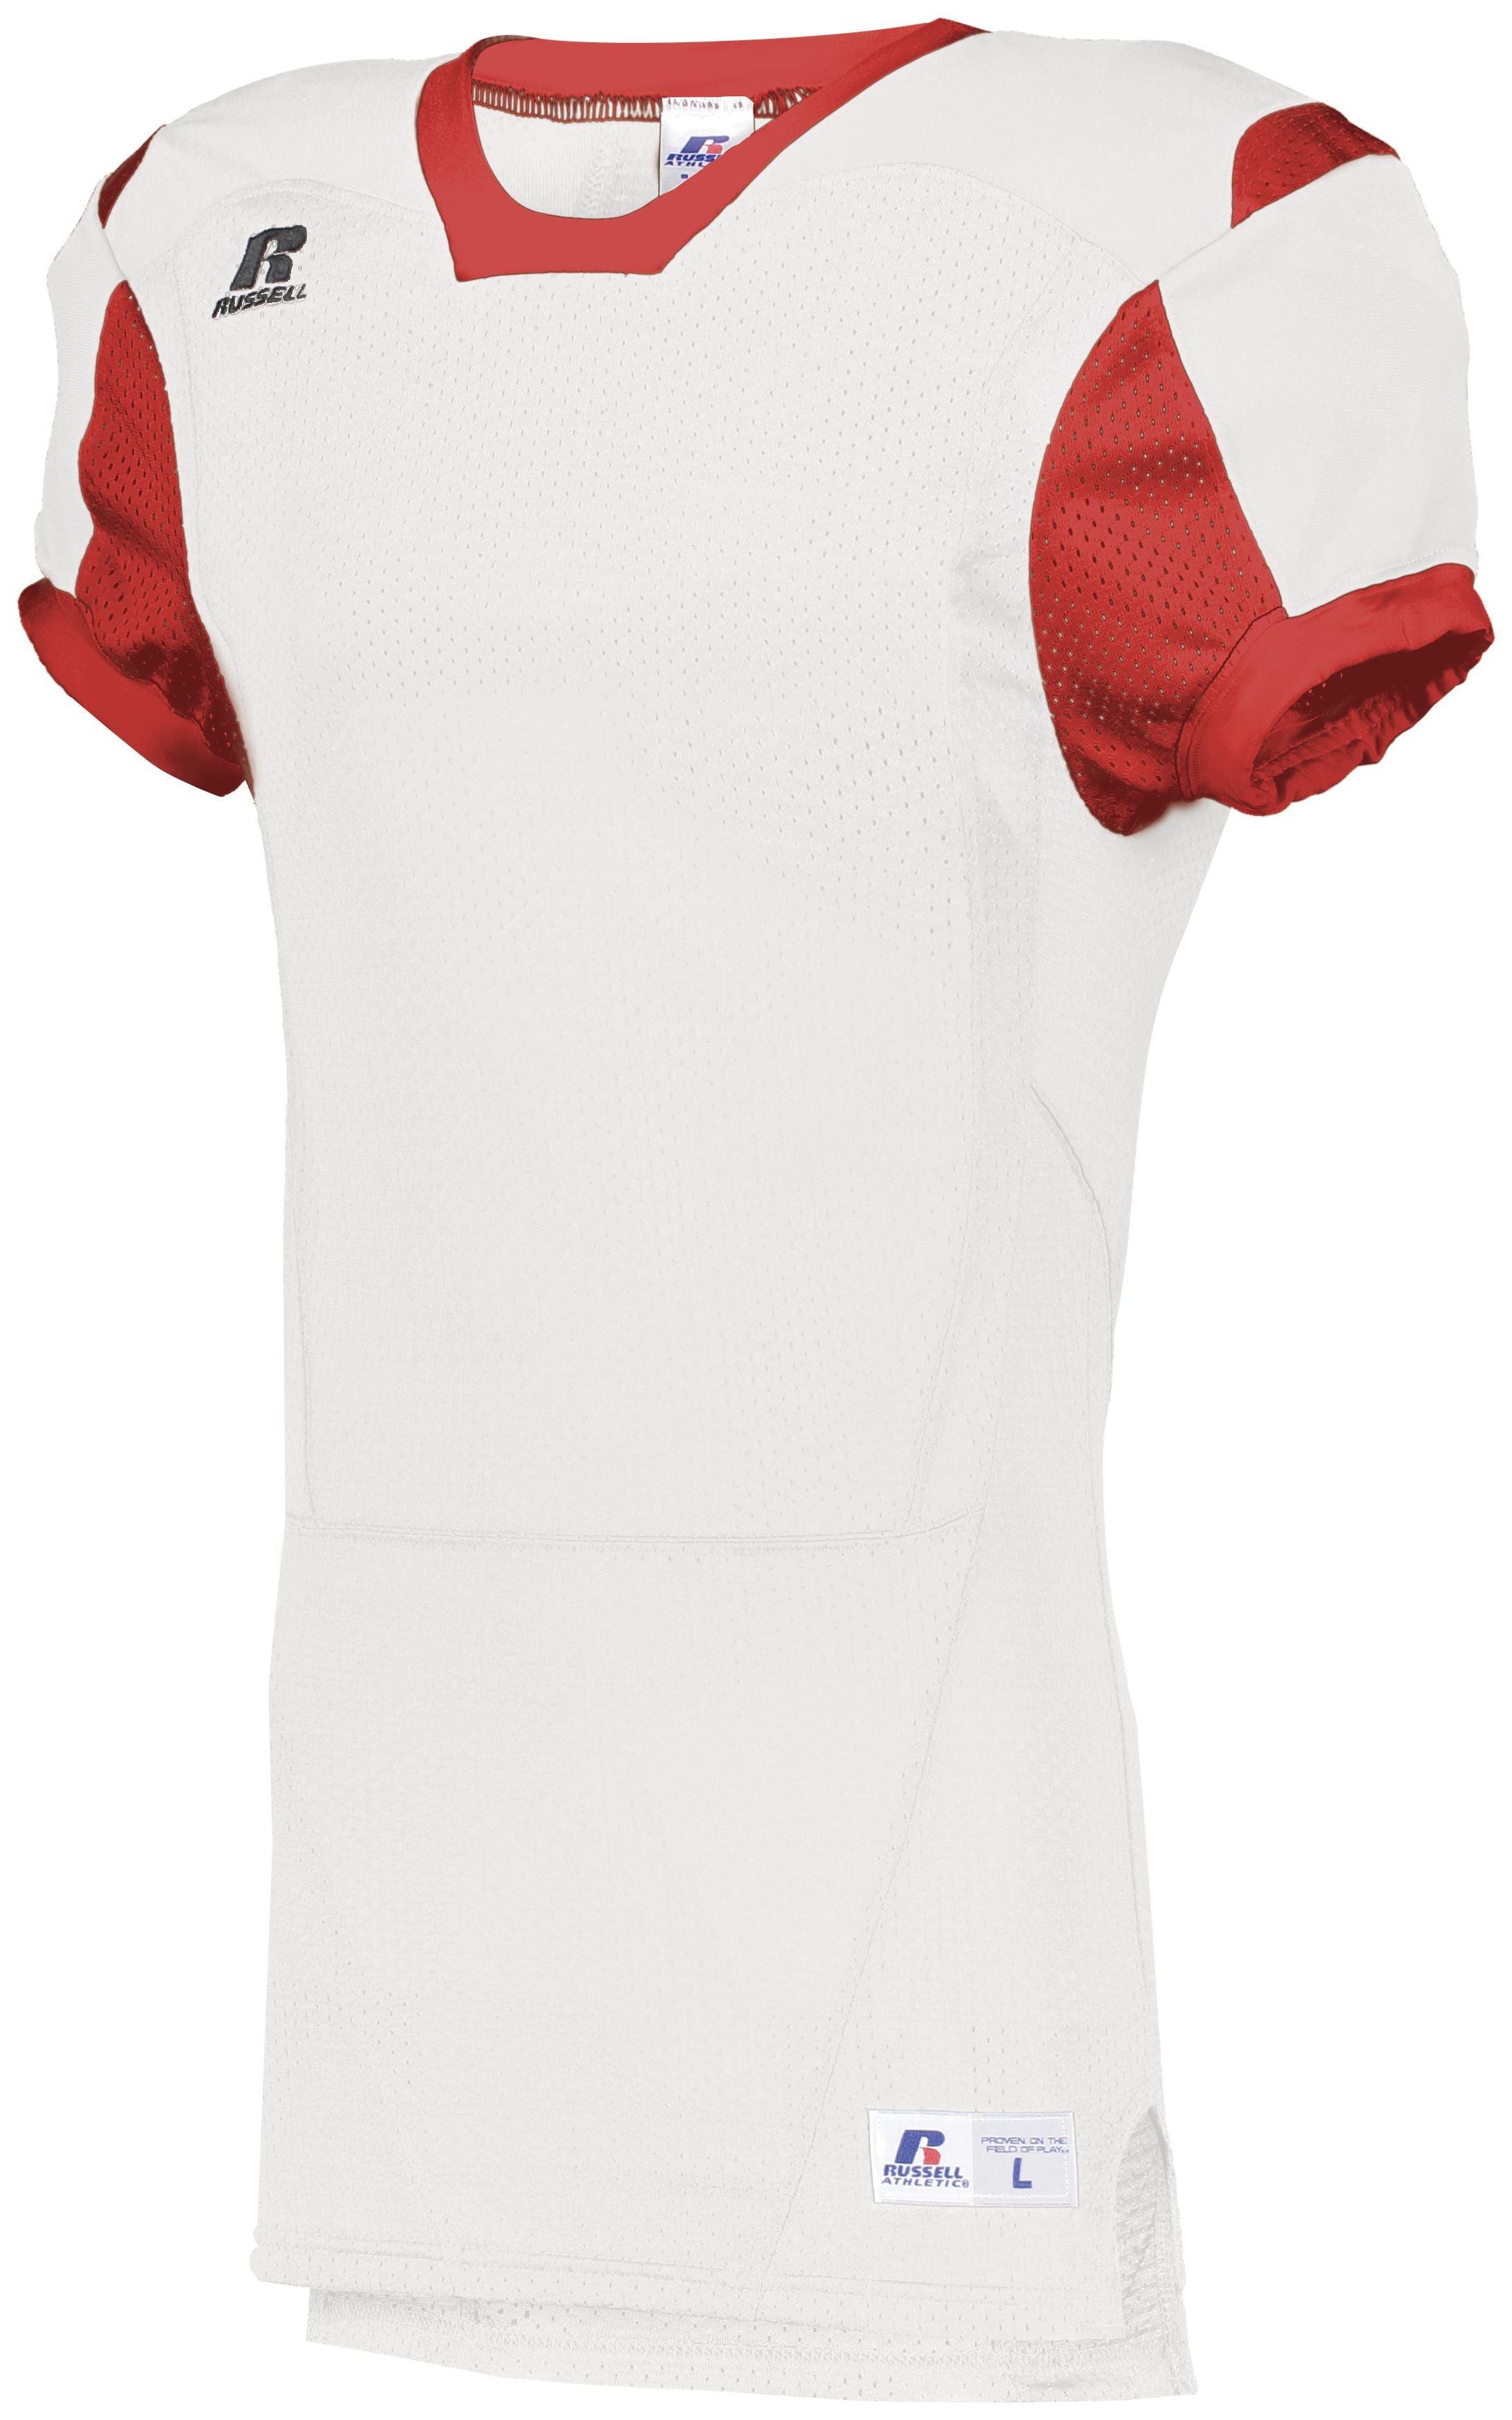 Russell Athletic Color Block Game Jersey in White/True Red  -Part of the Adult, Adult-Jersey, Football, Russell-Athletic-Products, Shirts, All-Sports, All-Sports-1 product lines at KanaleyCreations.com